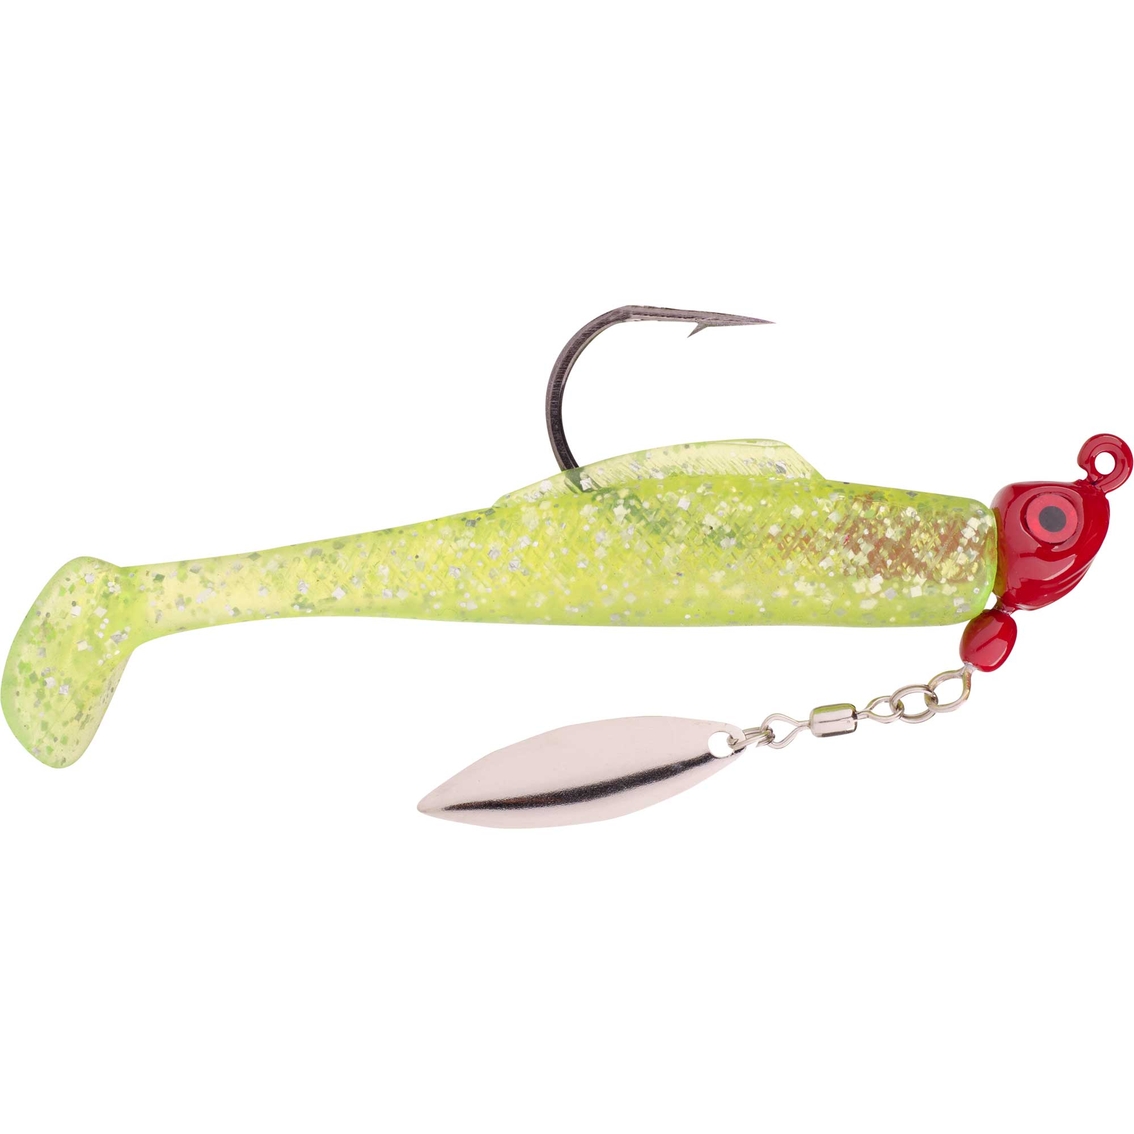 Strike King Speckled Trout Magic 1/4 Oz. Jig Head, Fishing Accessories, Sports & Outdoors